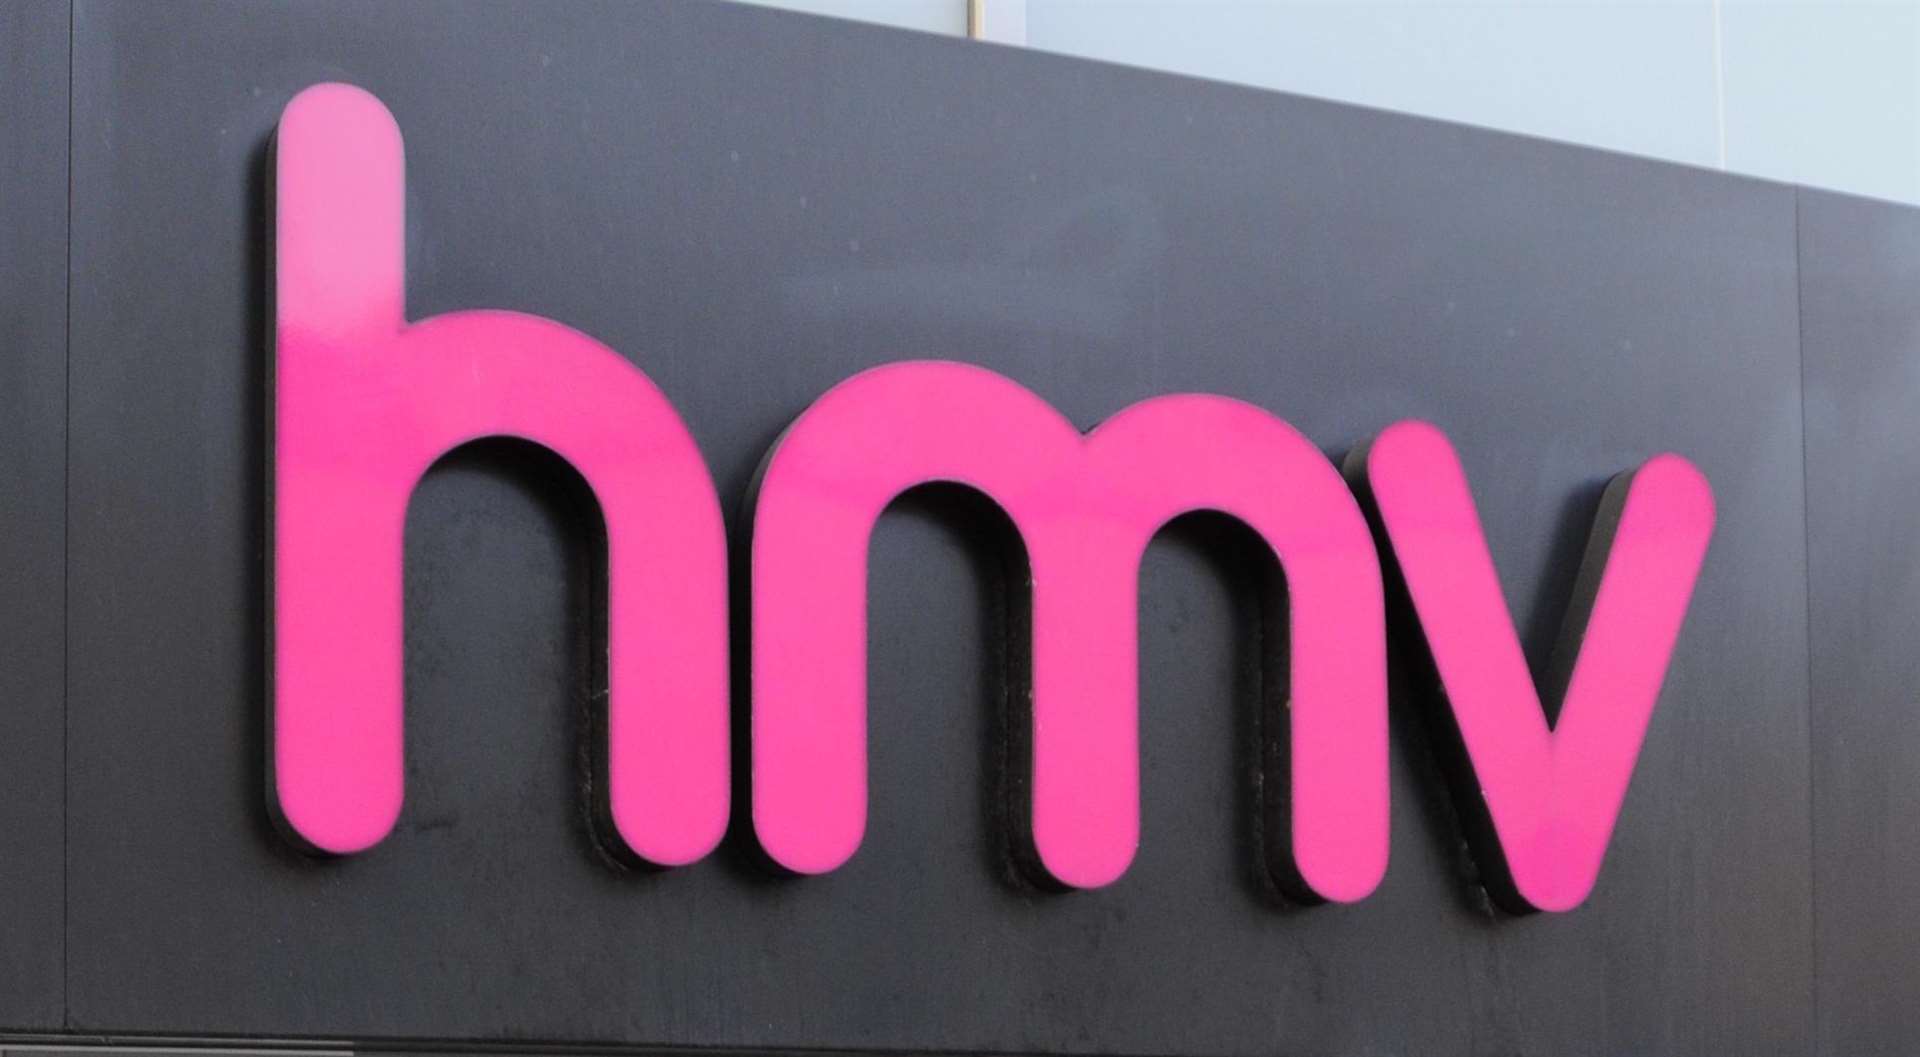 HMV stores in Bluewater and Tunbridge Wells will close